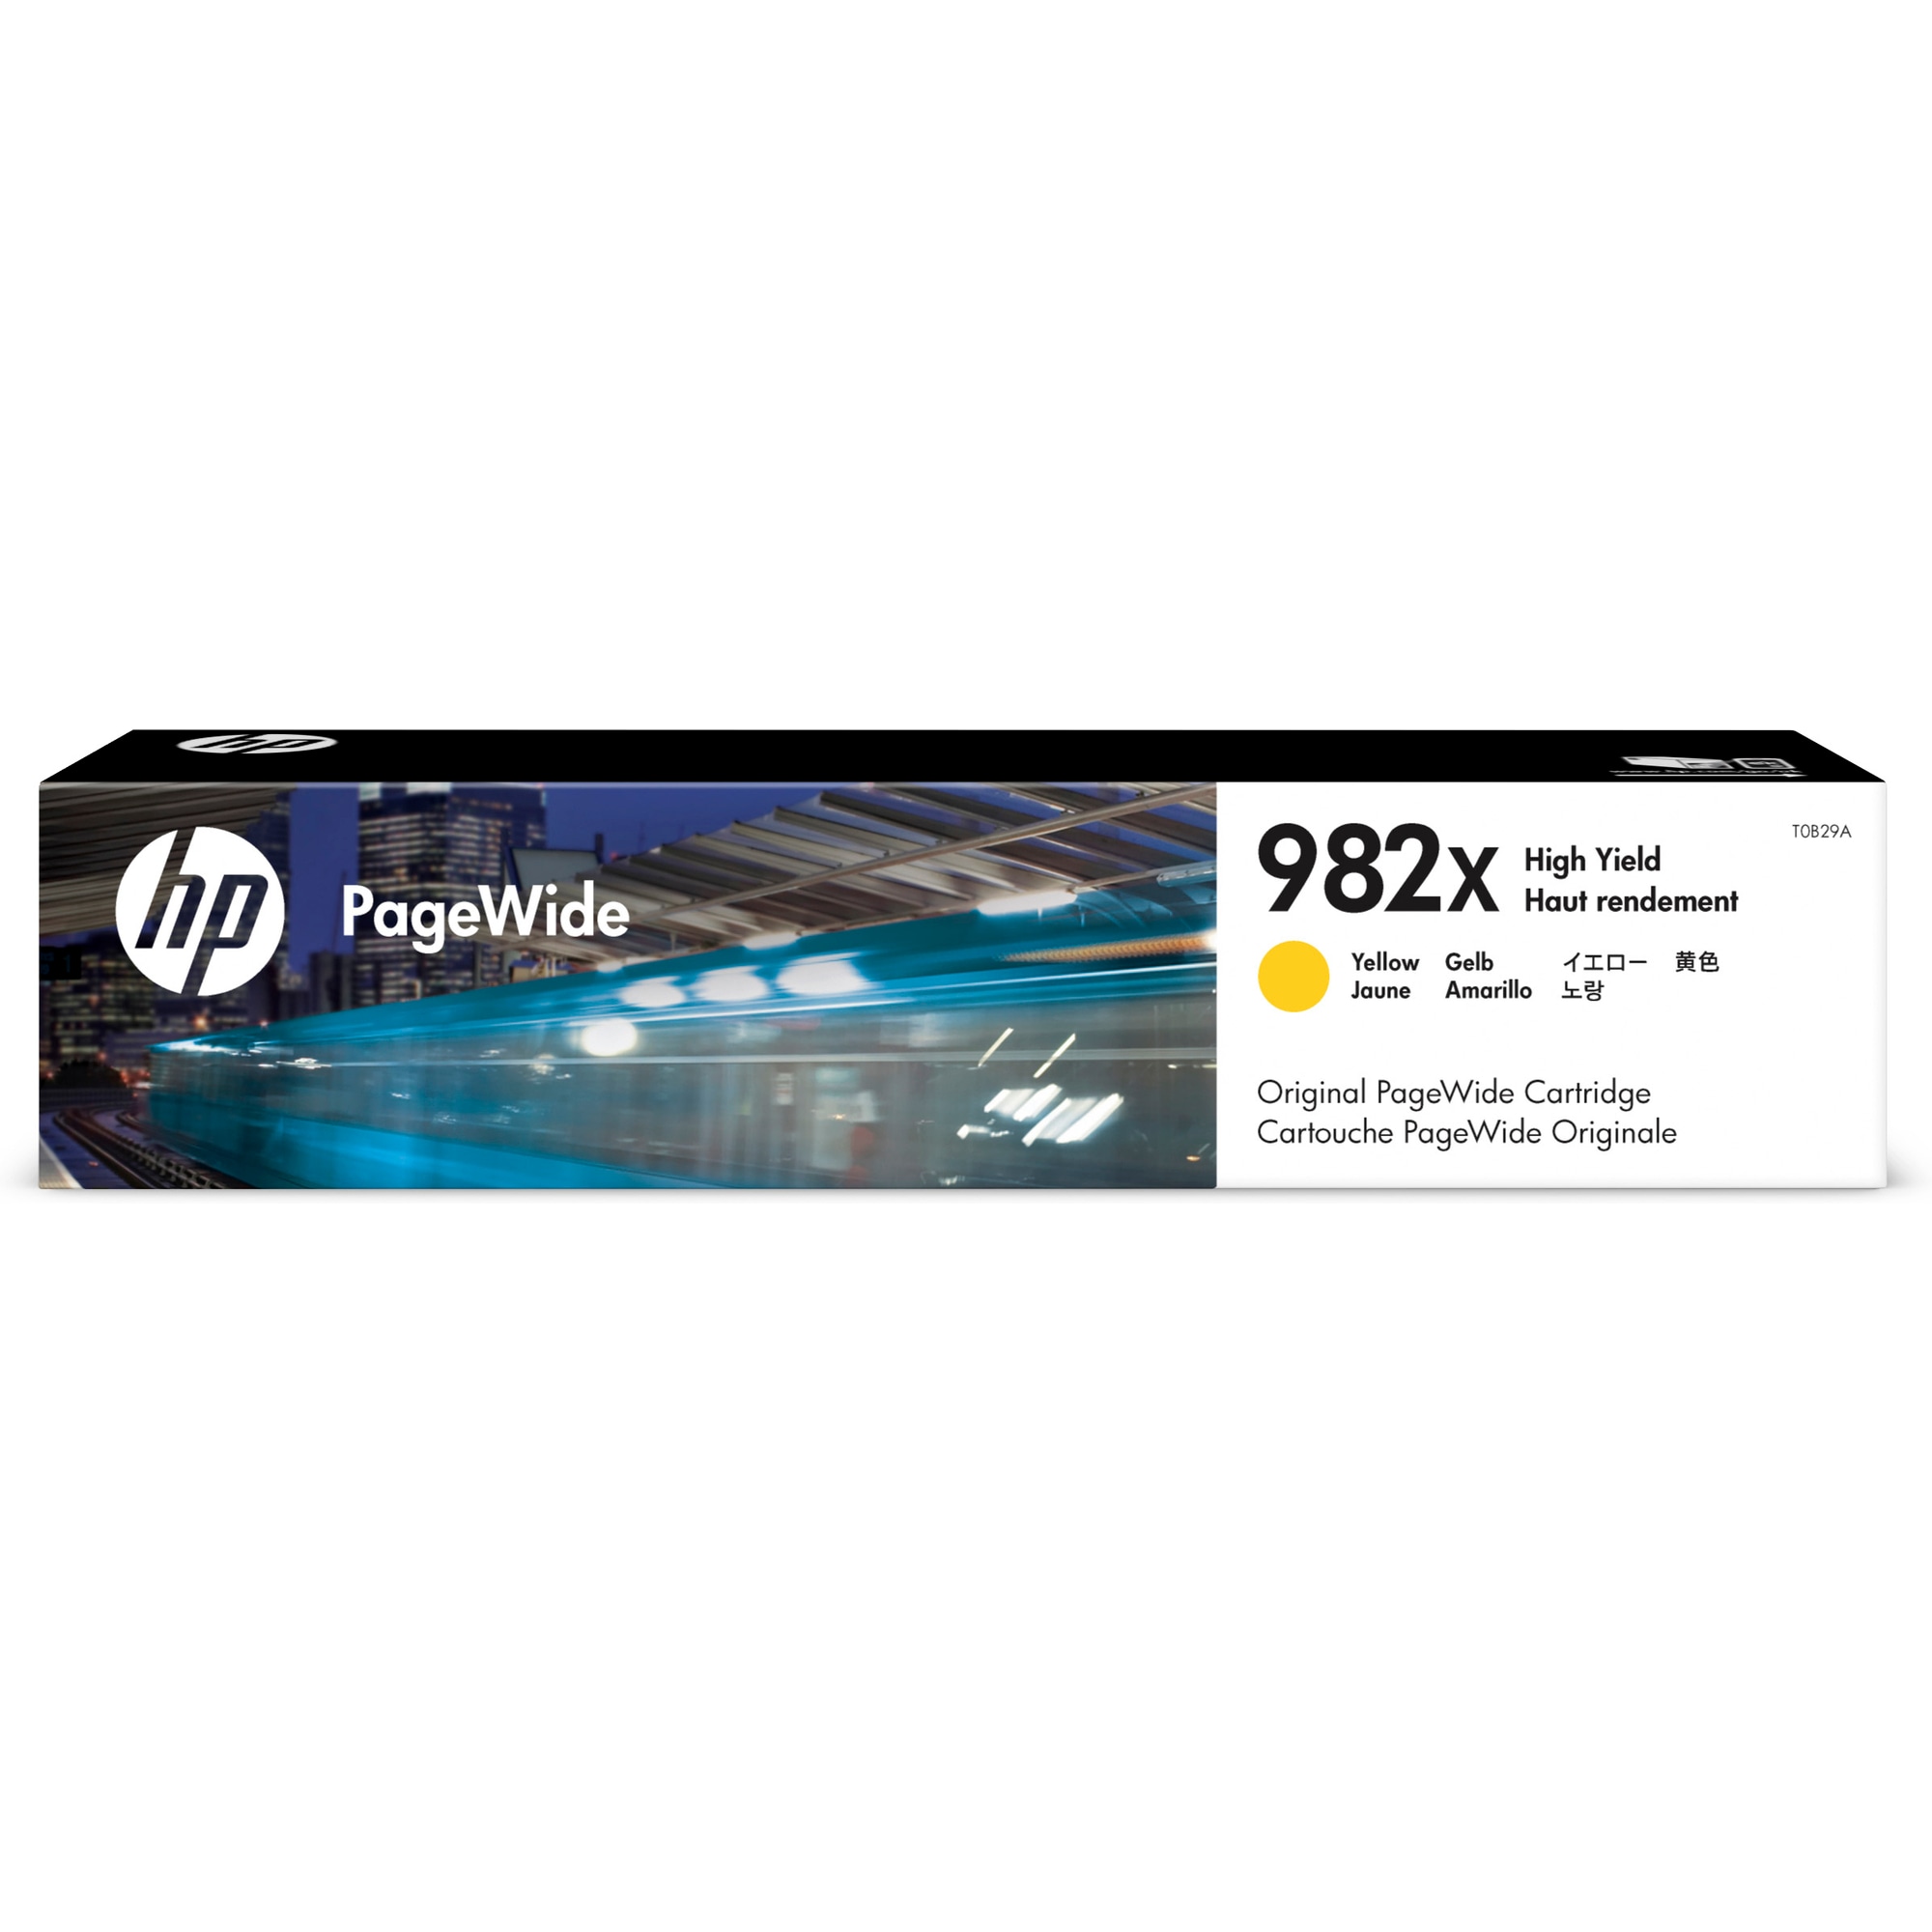 HP 982X High Yield Yellow Original PageWide Cartridge (16, 000 pages)0 